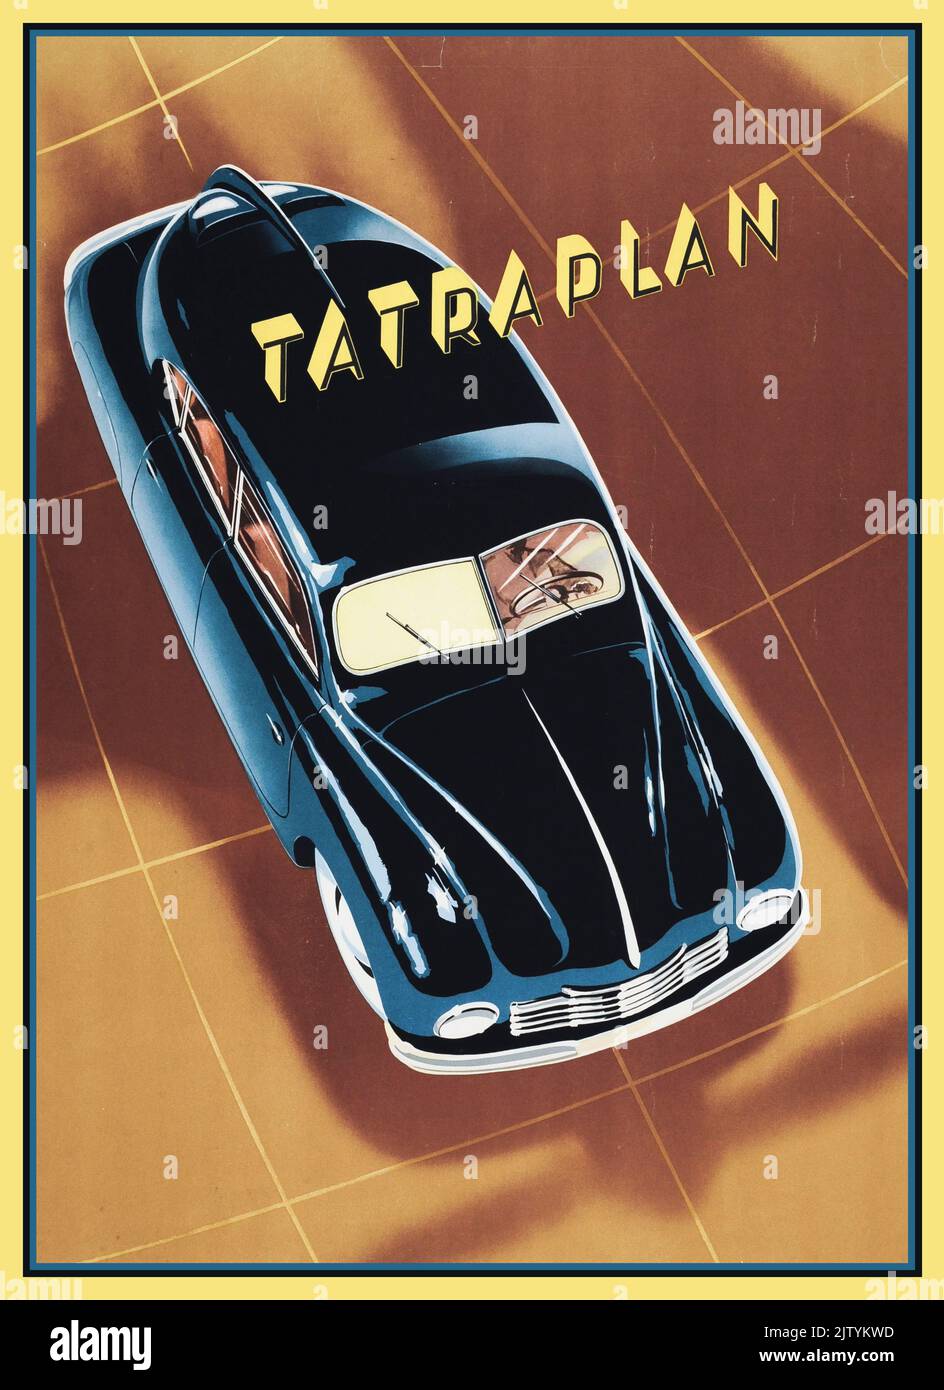 1951 T600 sports back Tatraplan advertising brochure cover magazine. The Tatra 600, named the Tatraplan, was a rear-engined large family car (D-segment in Europe) produced from 1948 to 1952 by the Czech manufacturer Tatra. The first prototype was finished in 1946. Stock Photo